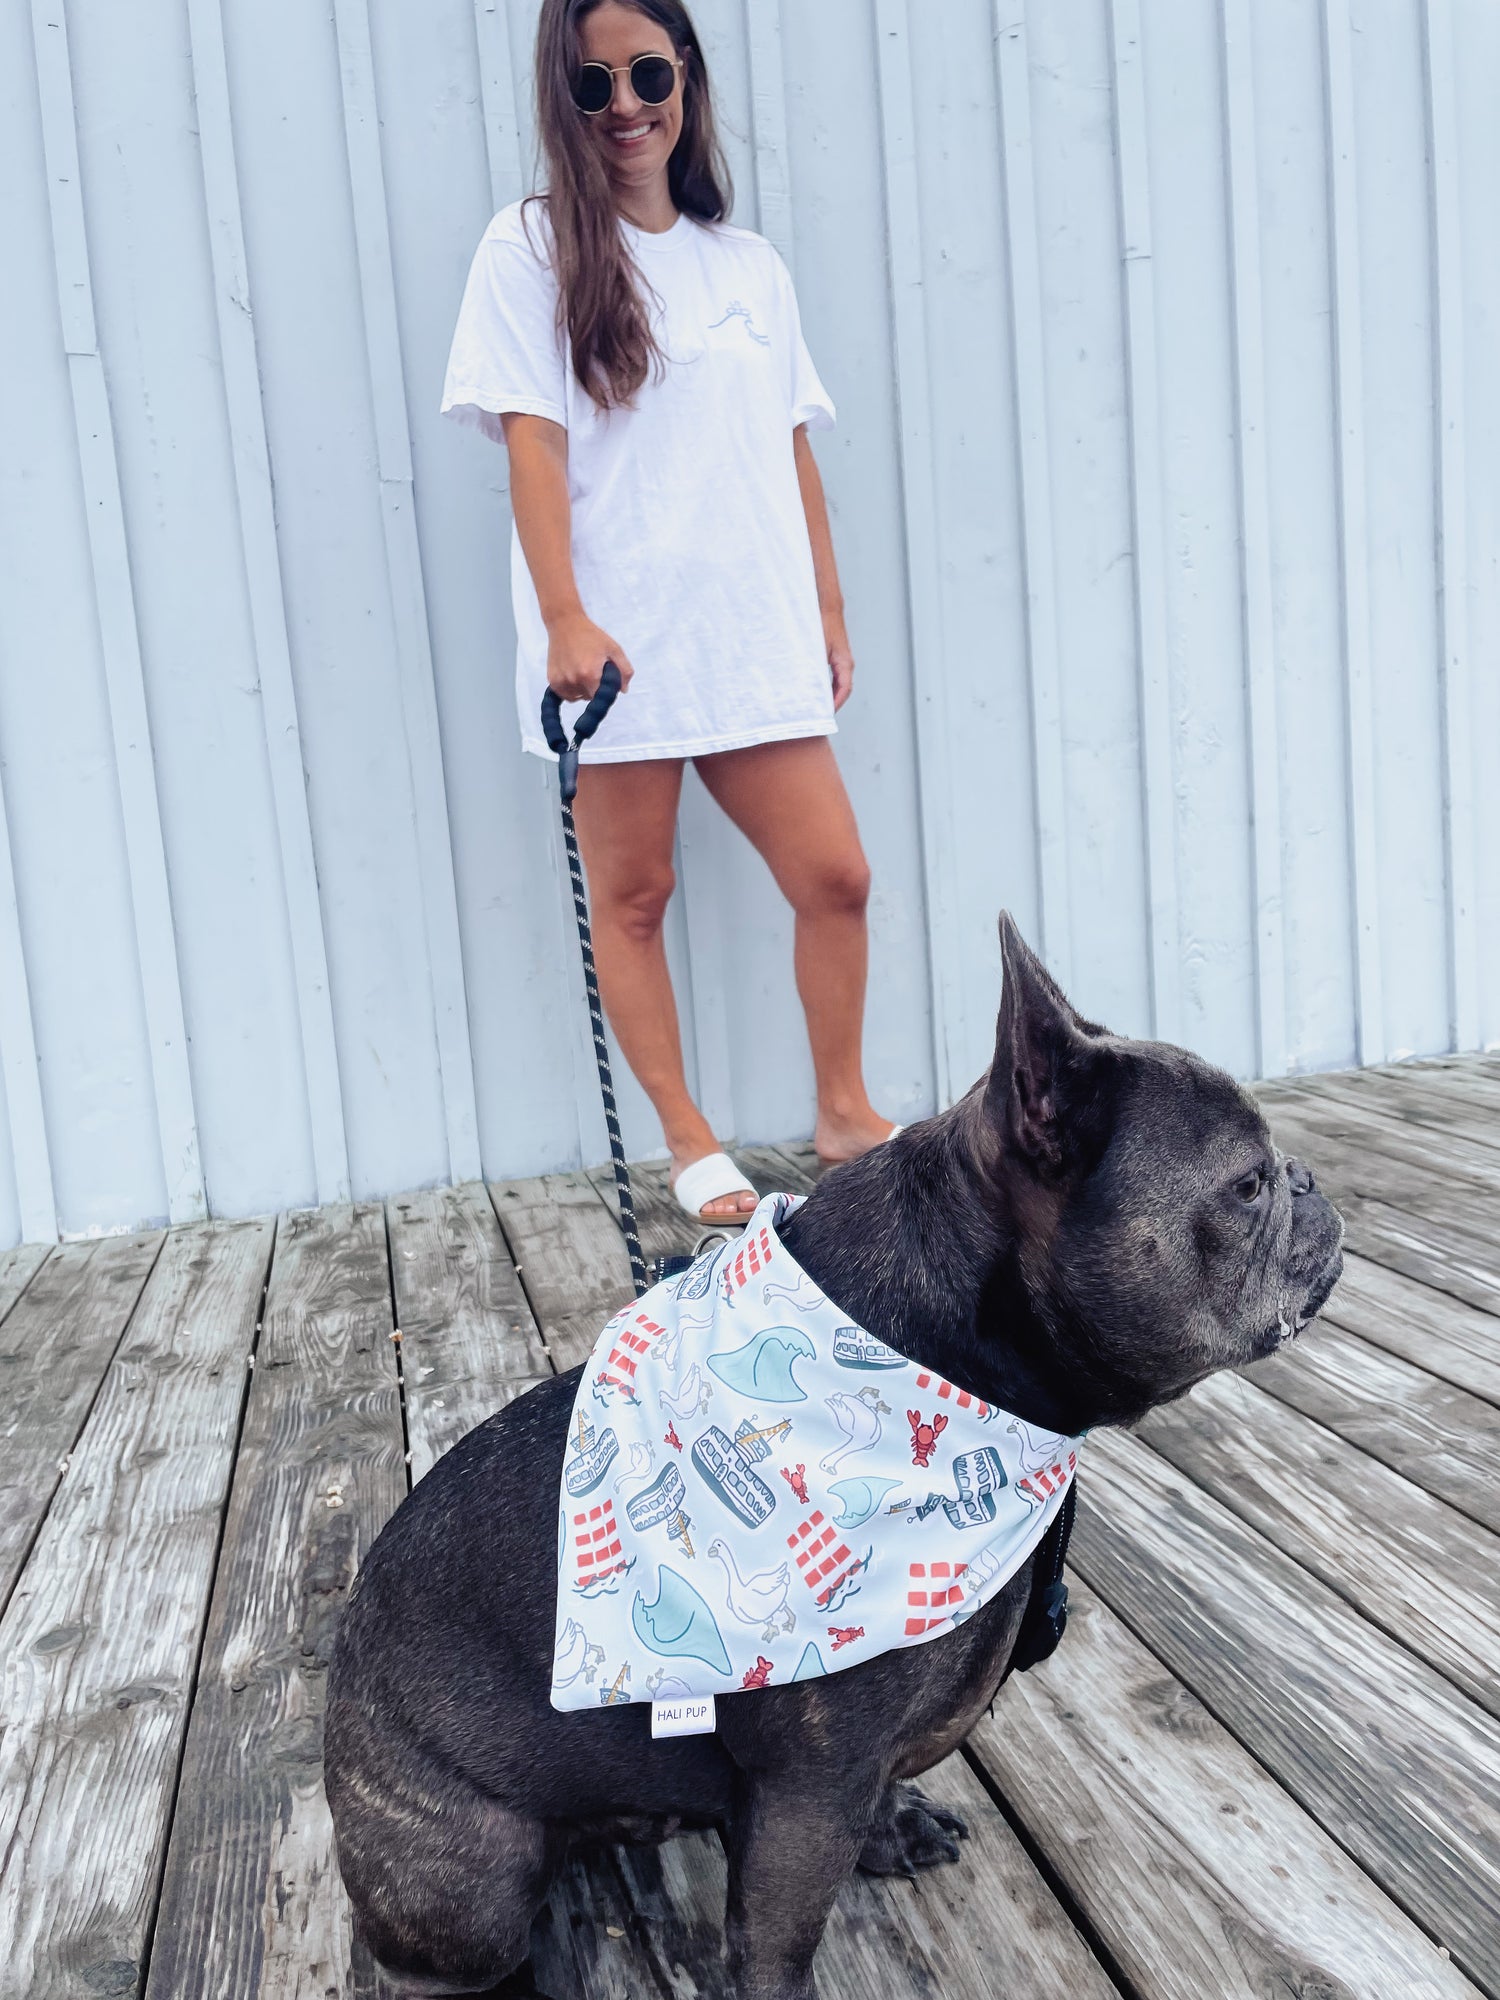 Nauti Dog Bandana. Handcrafted Dog Accessories for Your Pet